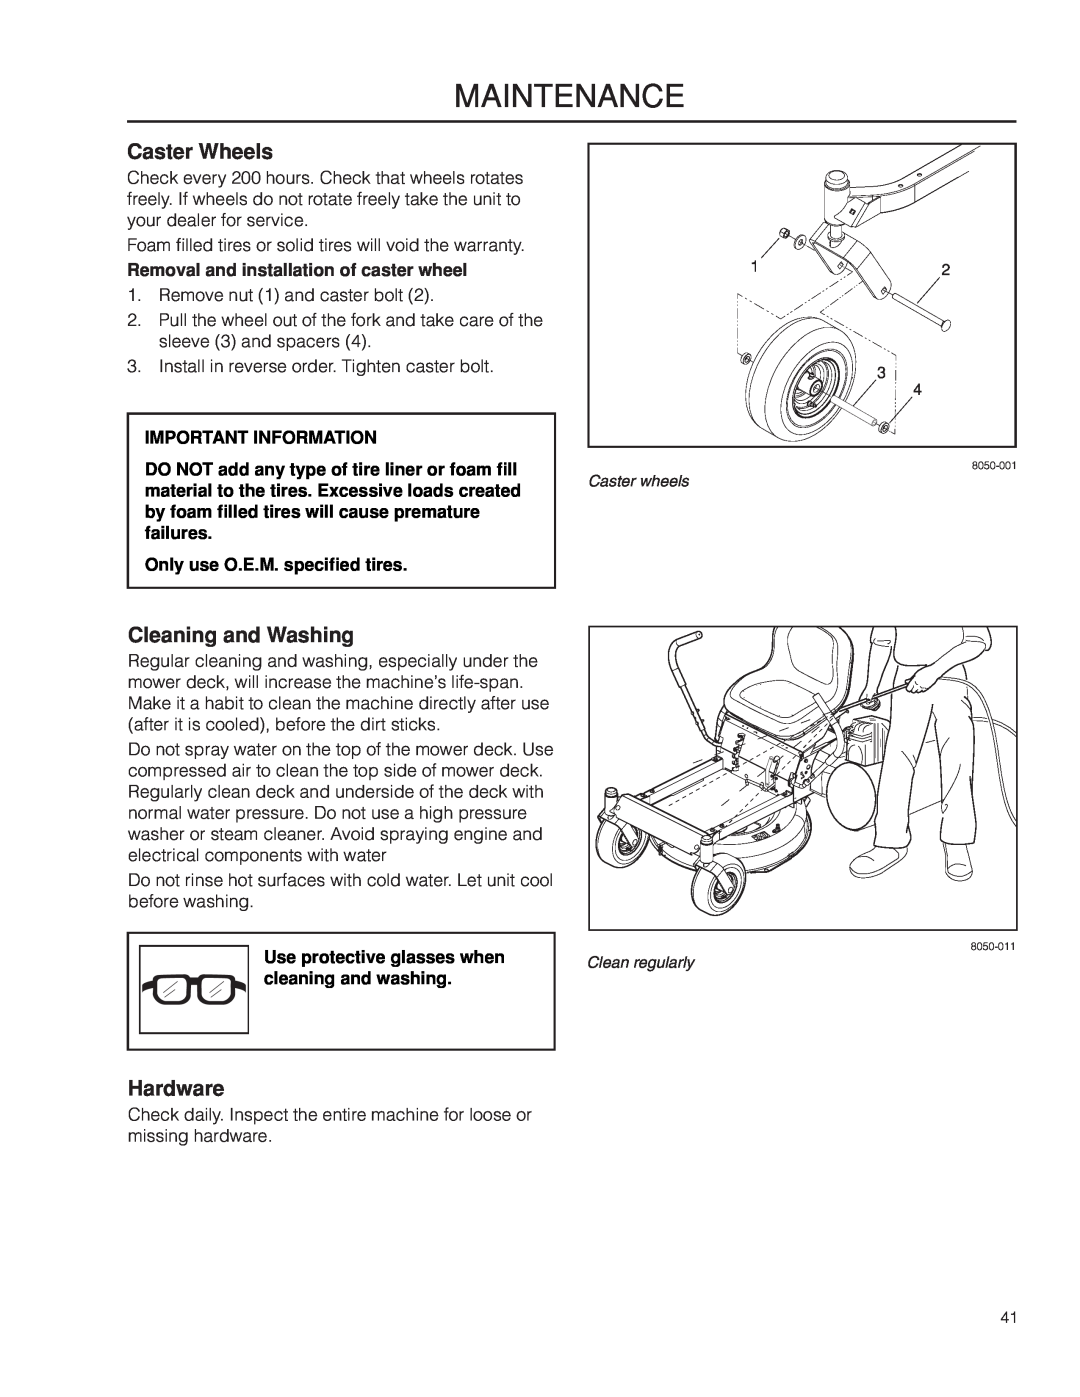 Dixon SPDZTR 30 manual Caster Wheels, Cleaning and Washing, Hardware, Maintenance, Removal and installation of caster wheel 